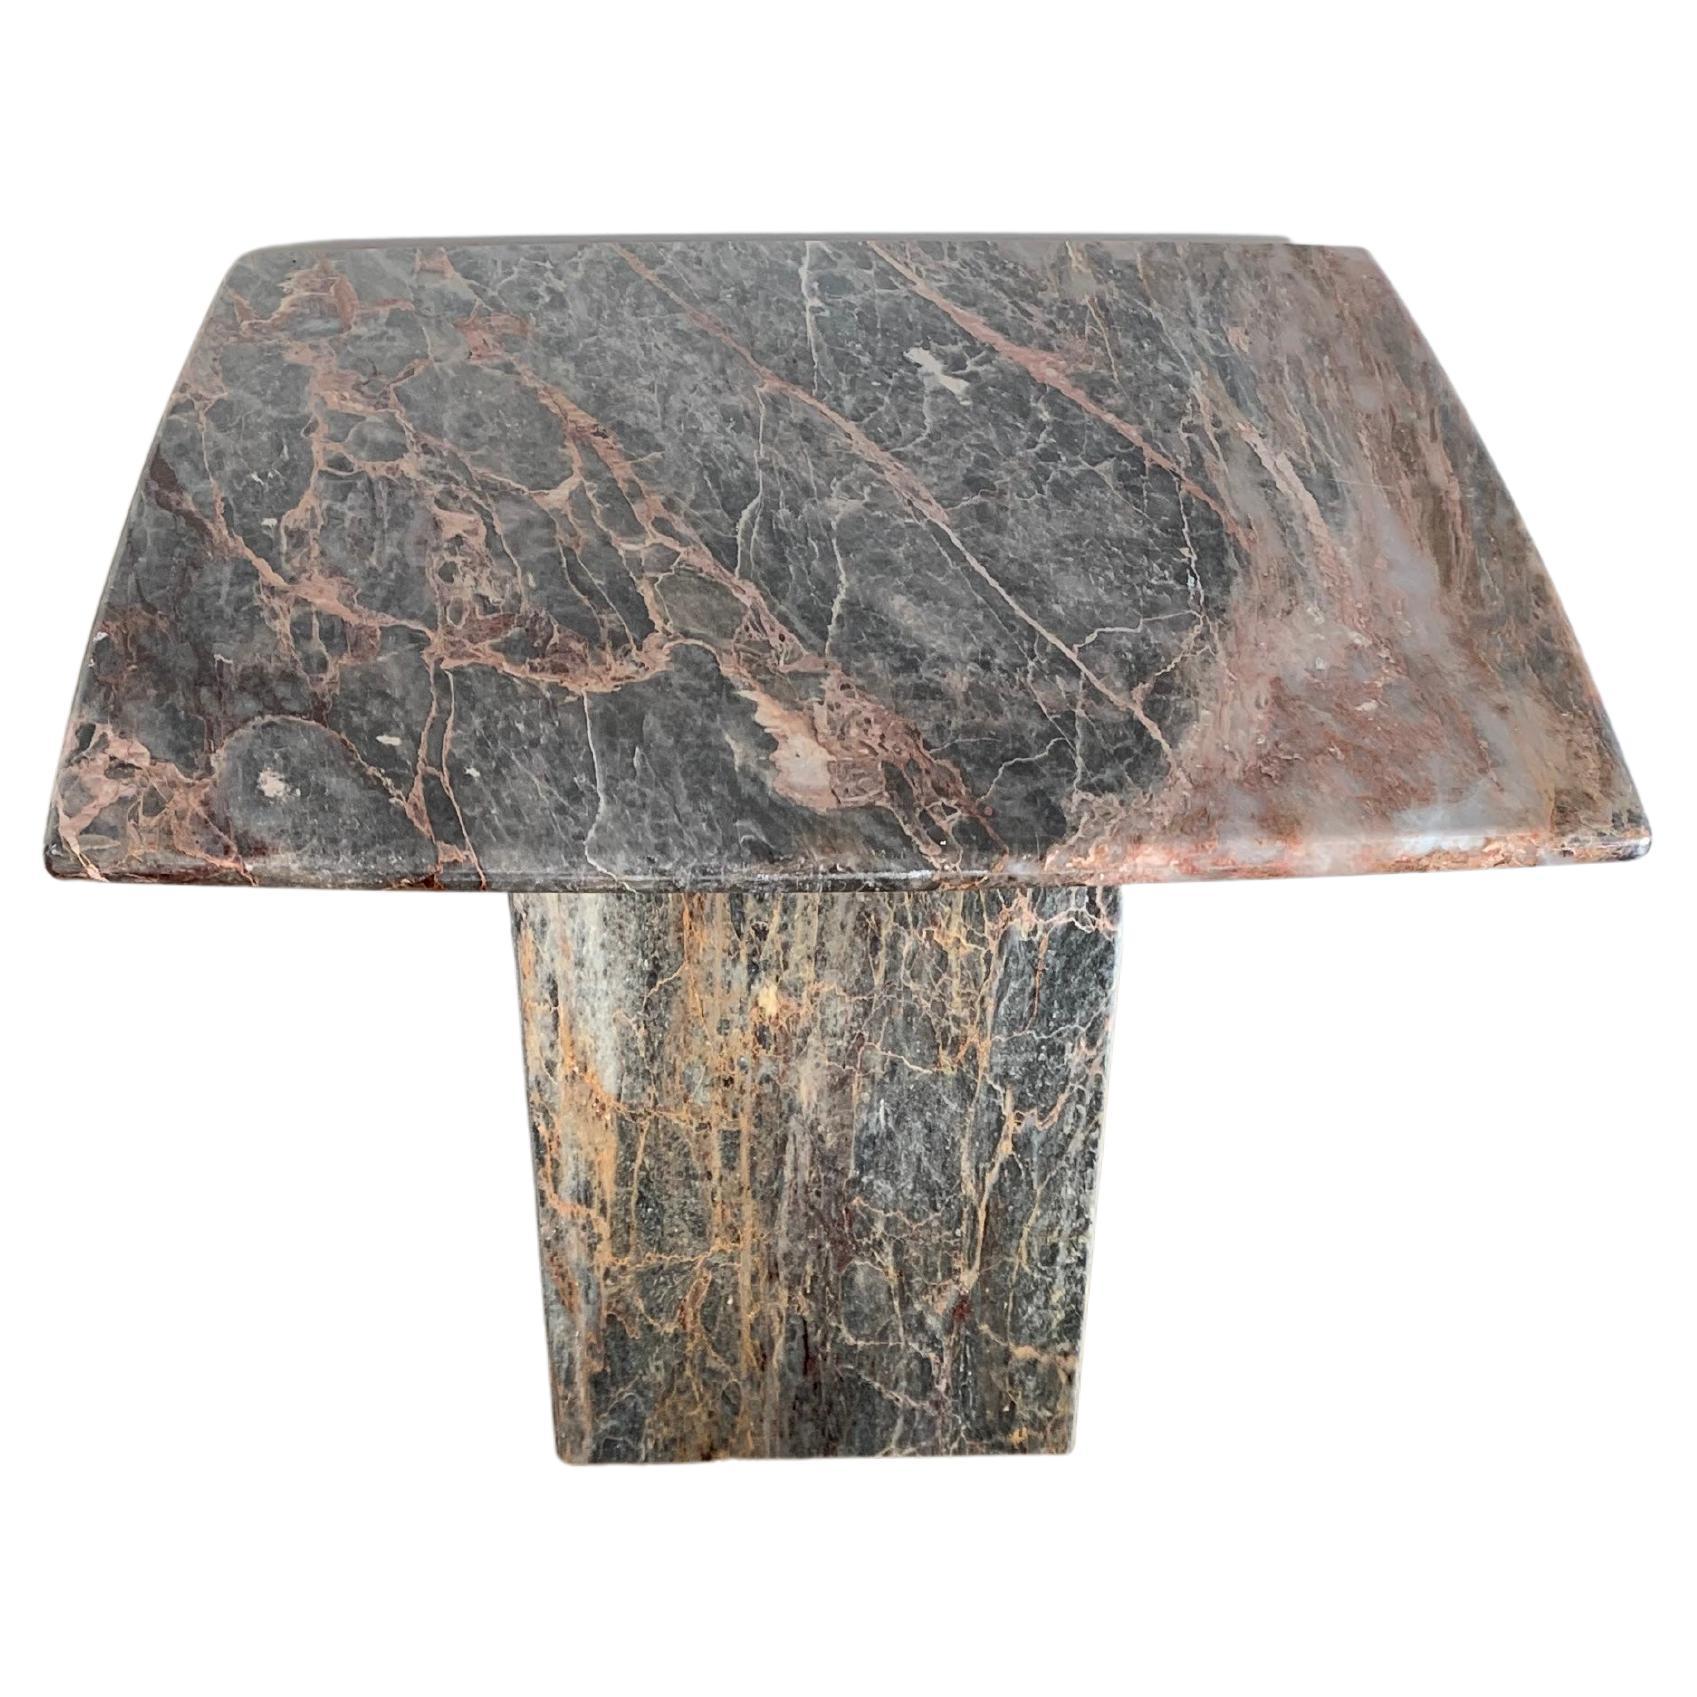 Vintage Italian Pink and Gray Marble Pedestal Accent Table, circa 1970s